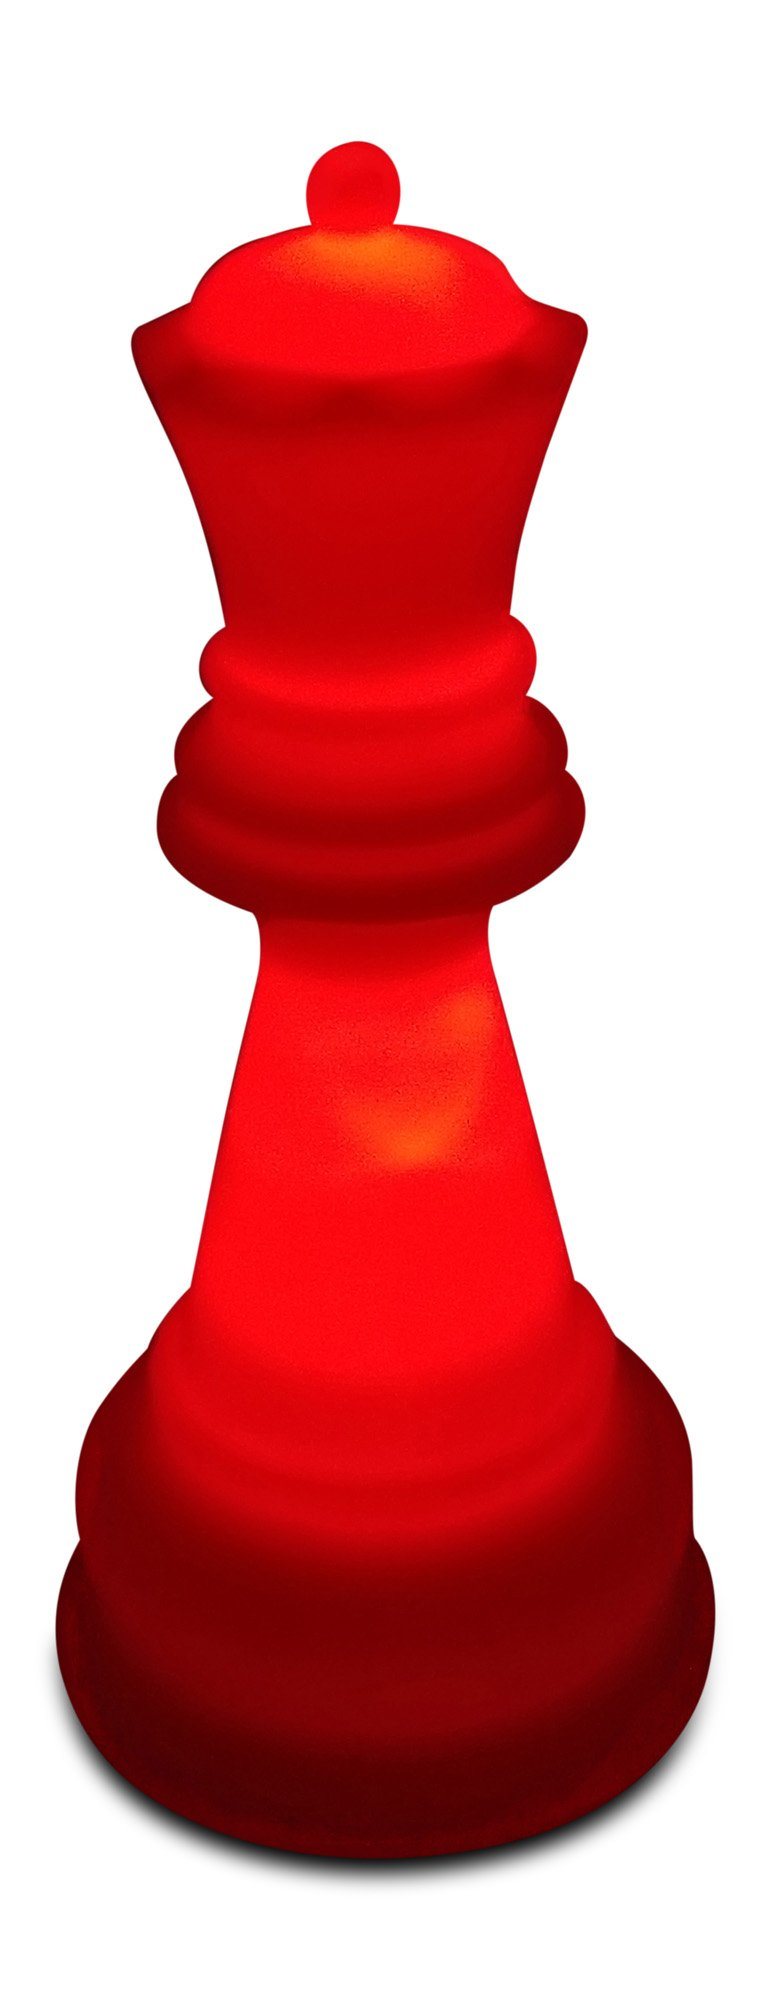 MegaChess 31 Inch Premium Plastic Queen Light-Up Giant Chess Piece - Red | Default Title | GiantChessUSA